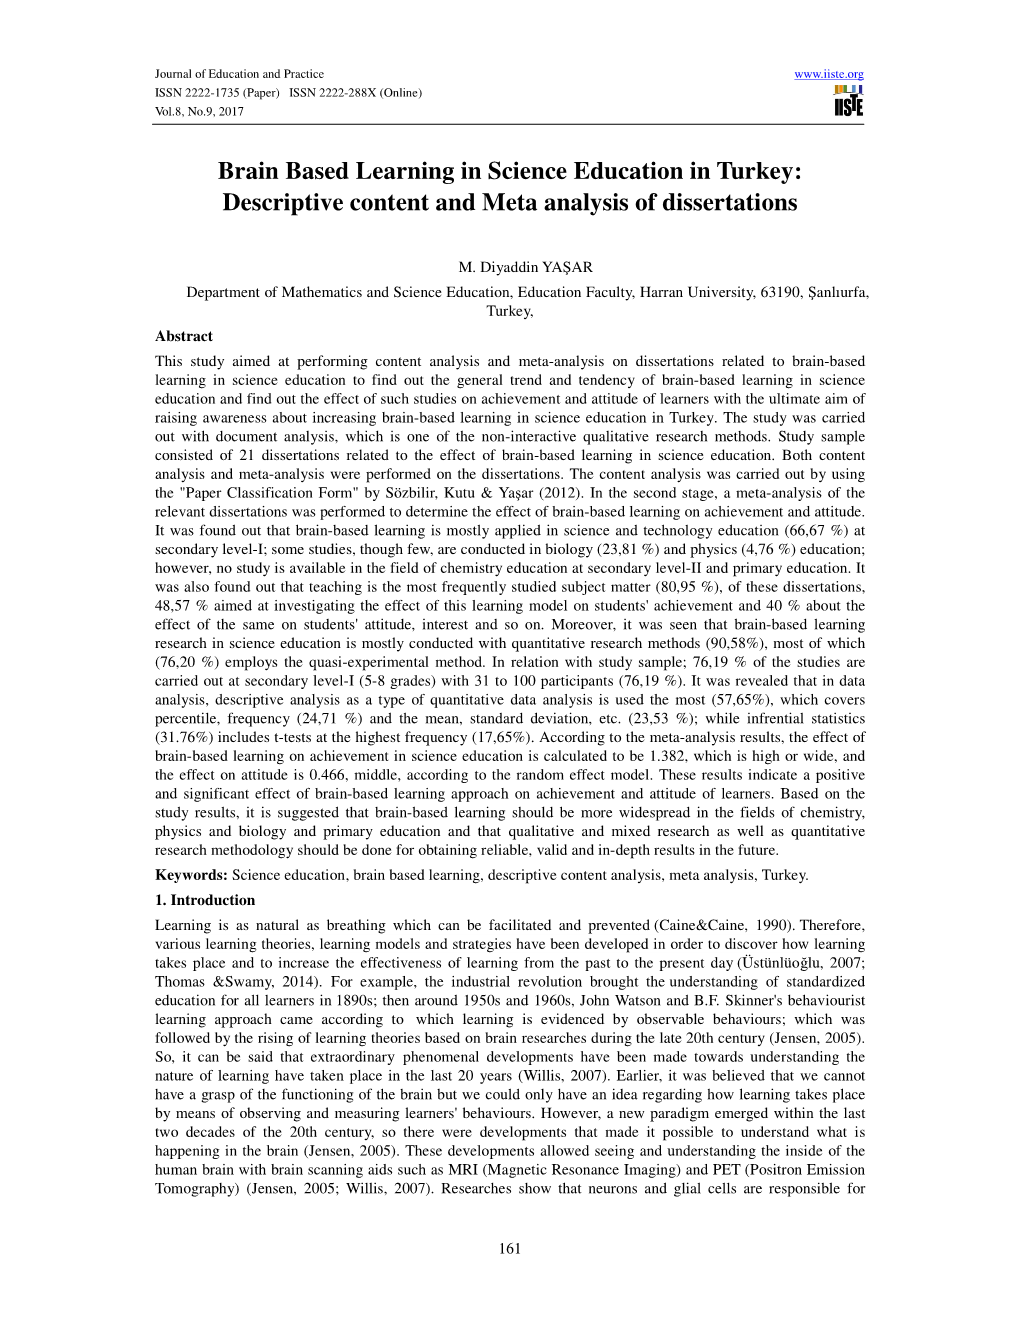 Brain Based Learning in Science Education in Turkey: Descriptive Content and Meta Analysis of Dissertations